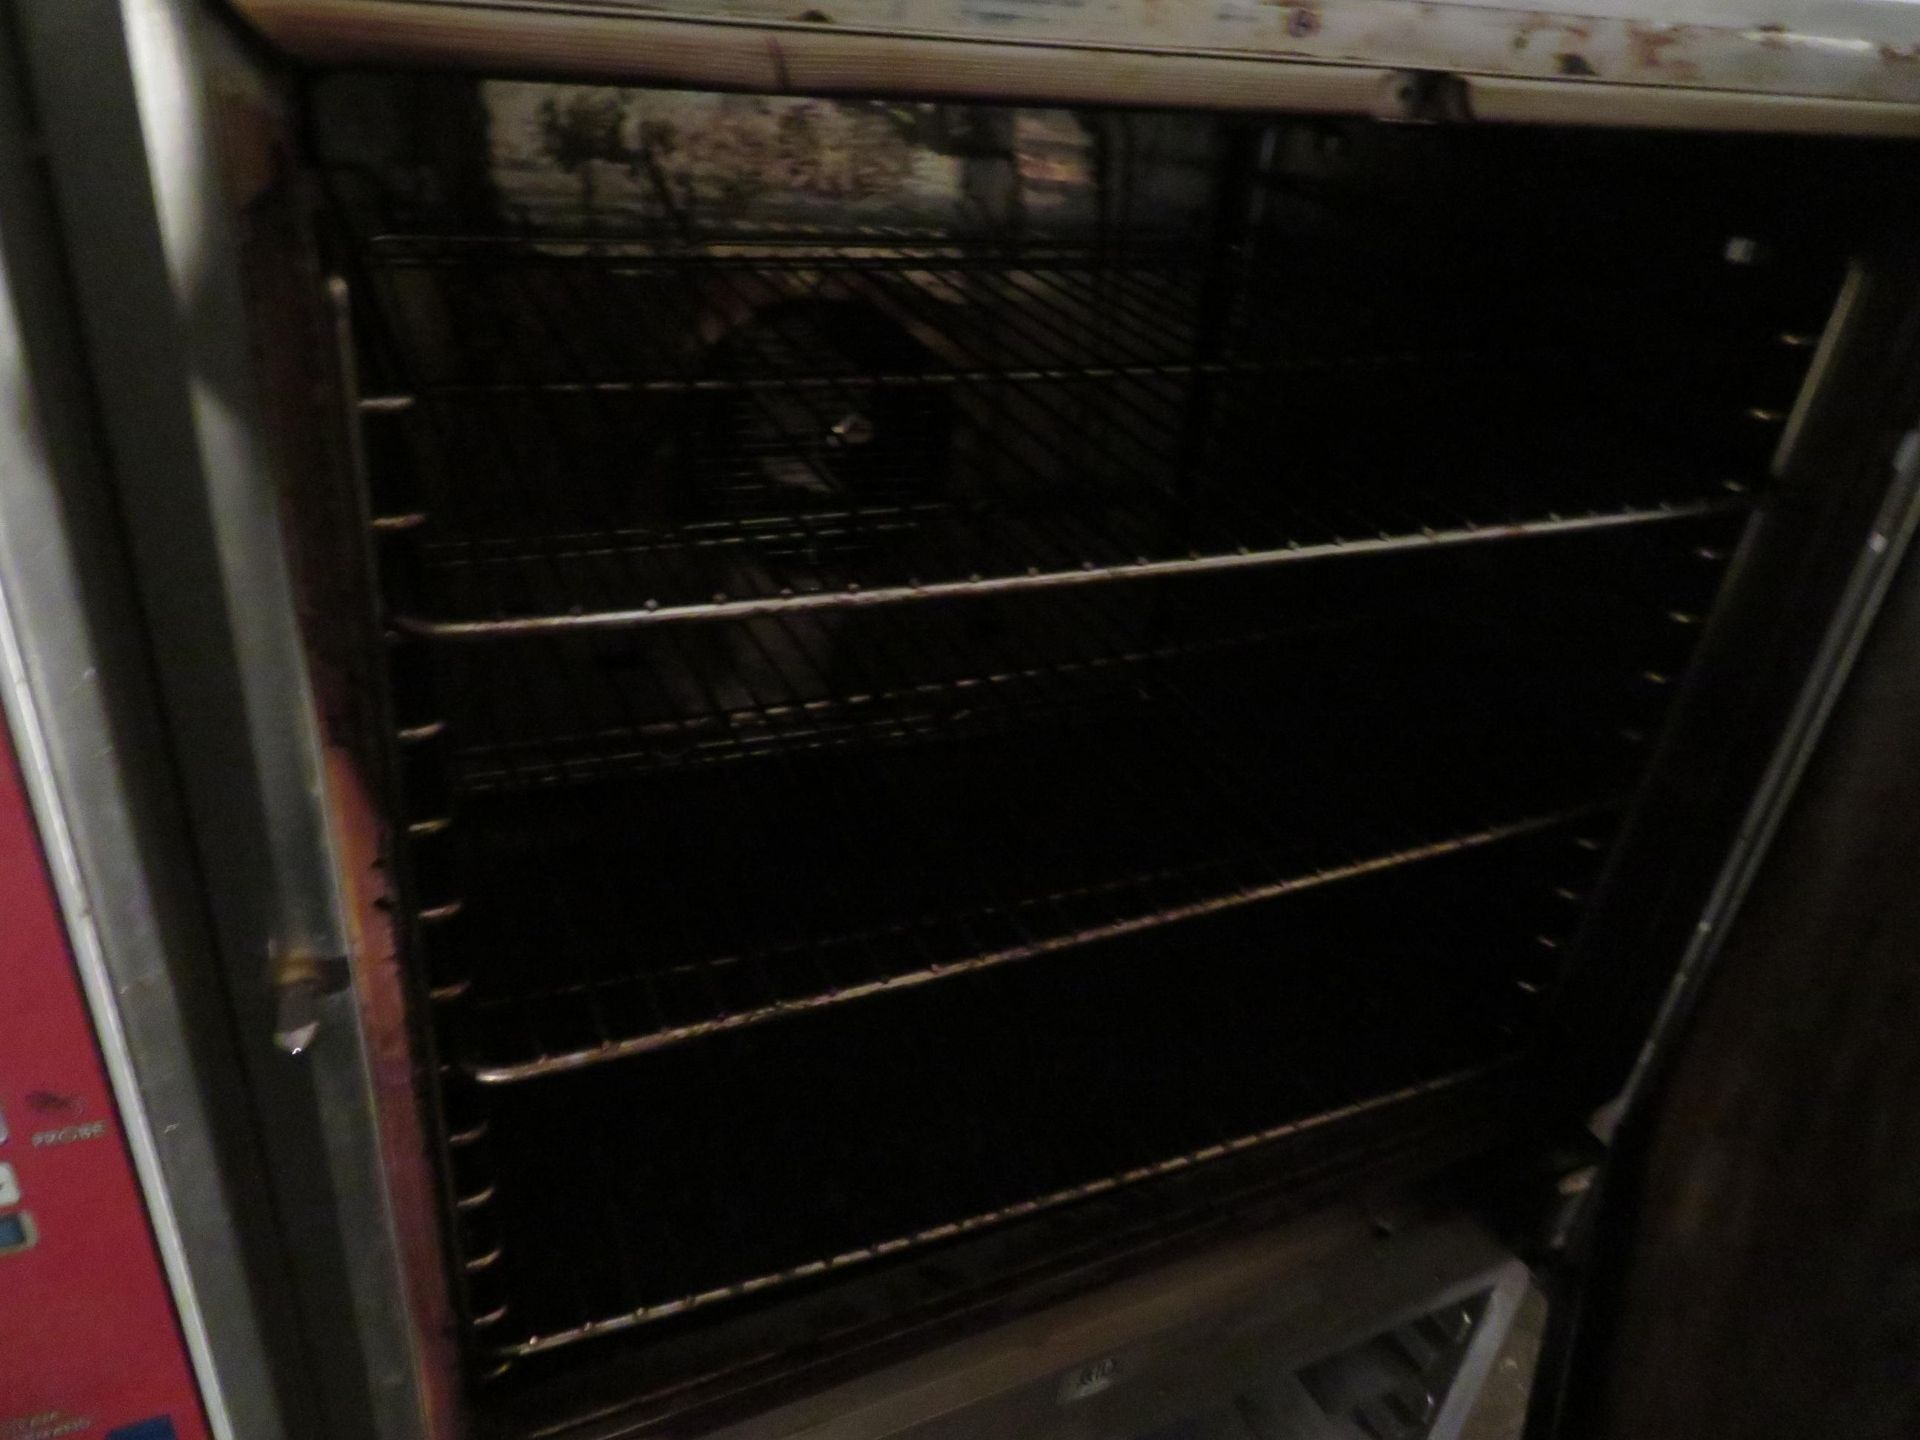 BLODGETT commercial oven with rack on wheels, Mod #BCX14 approx. 40"w x 37"d x 56"h - Image 4 of 4